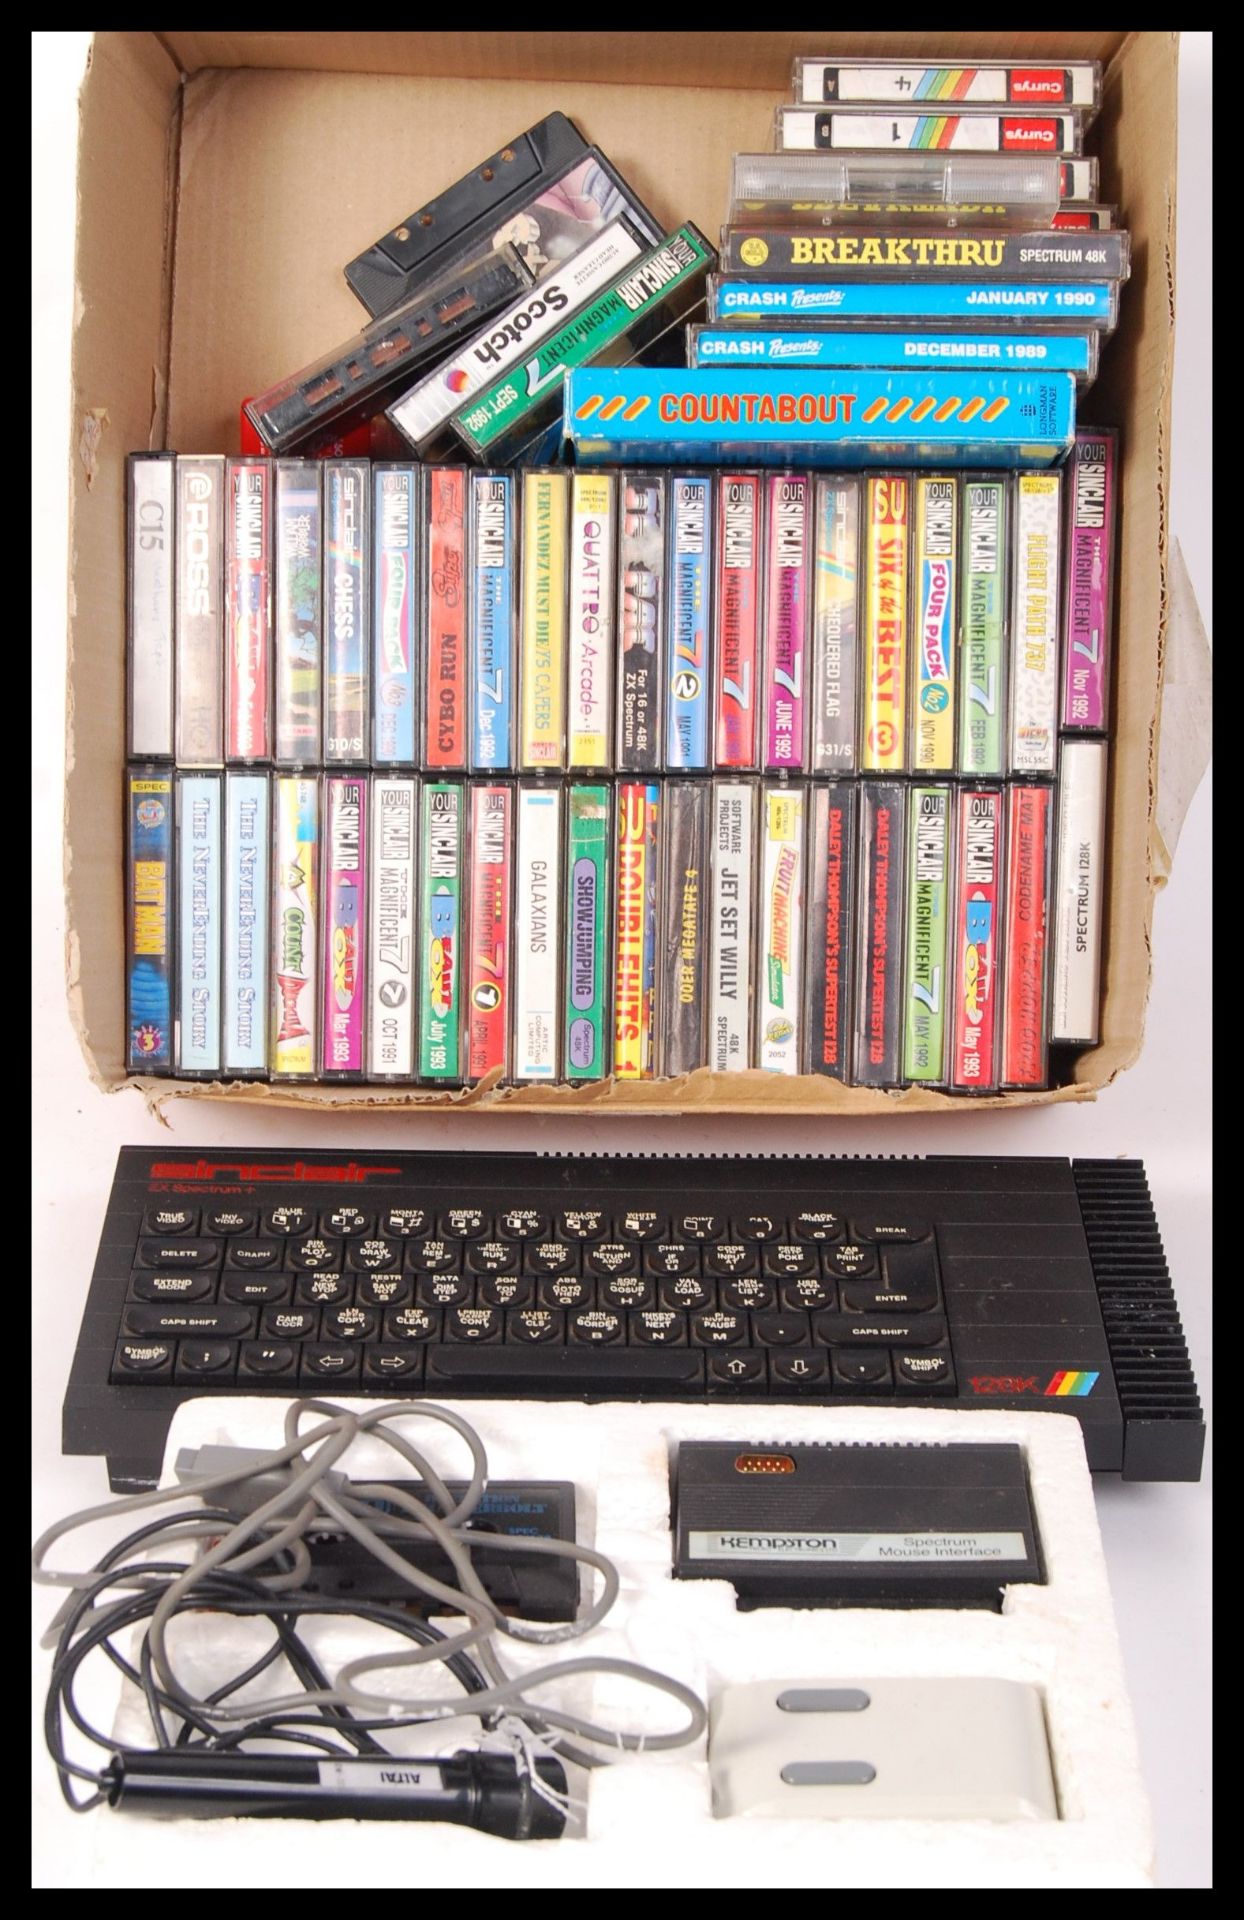 SINCLAIR ZX SPECTRUM 128K VIDEO GAMING COMPUTER CONSOLE